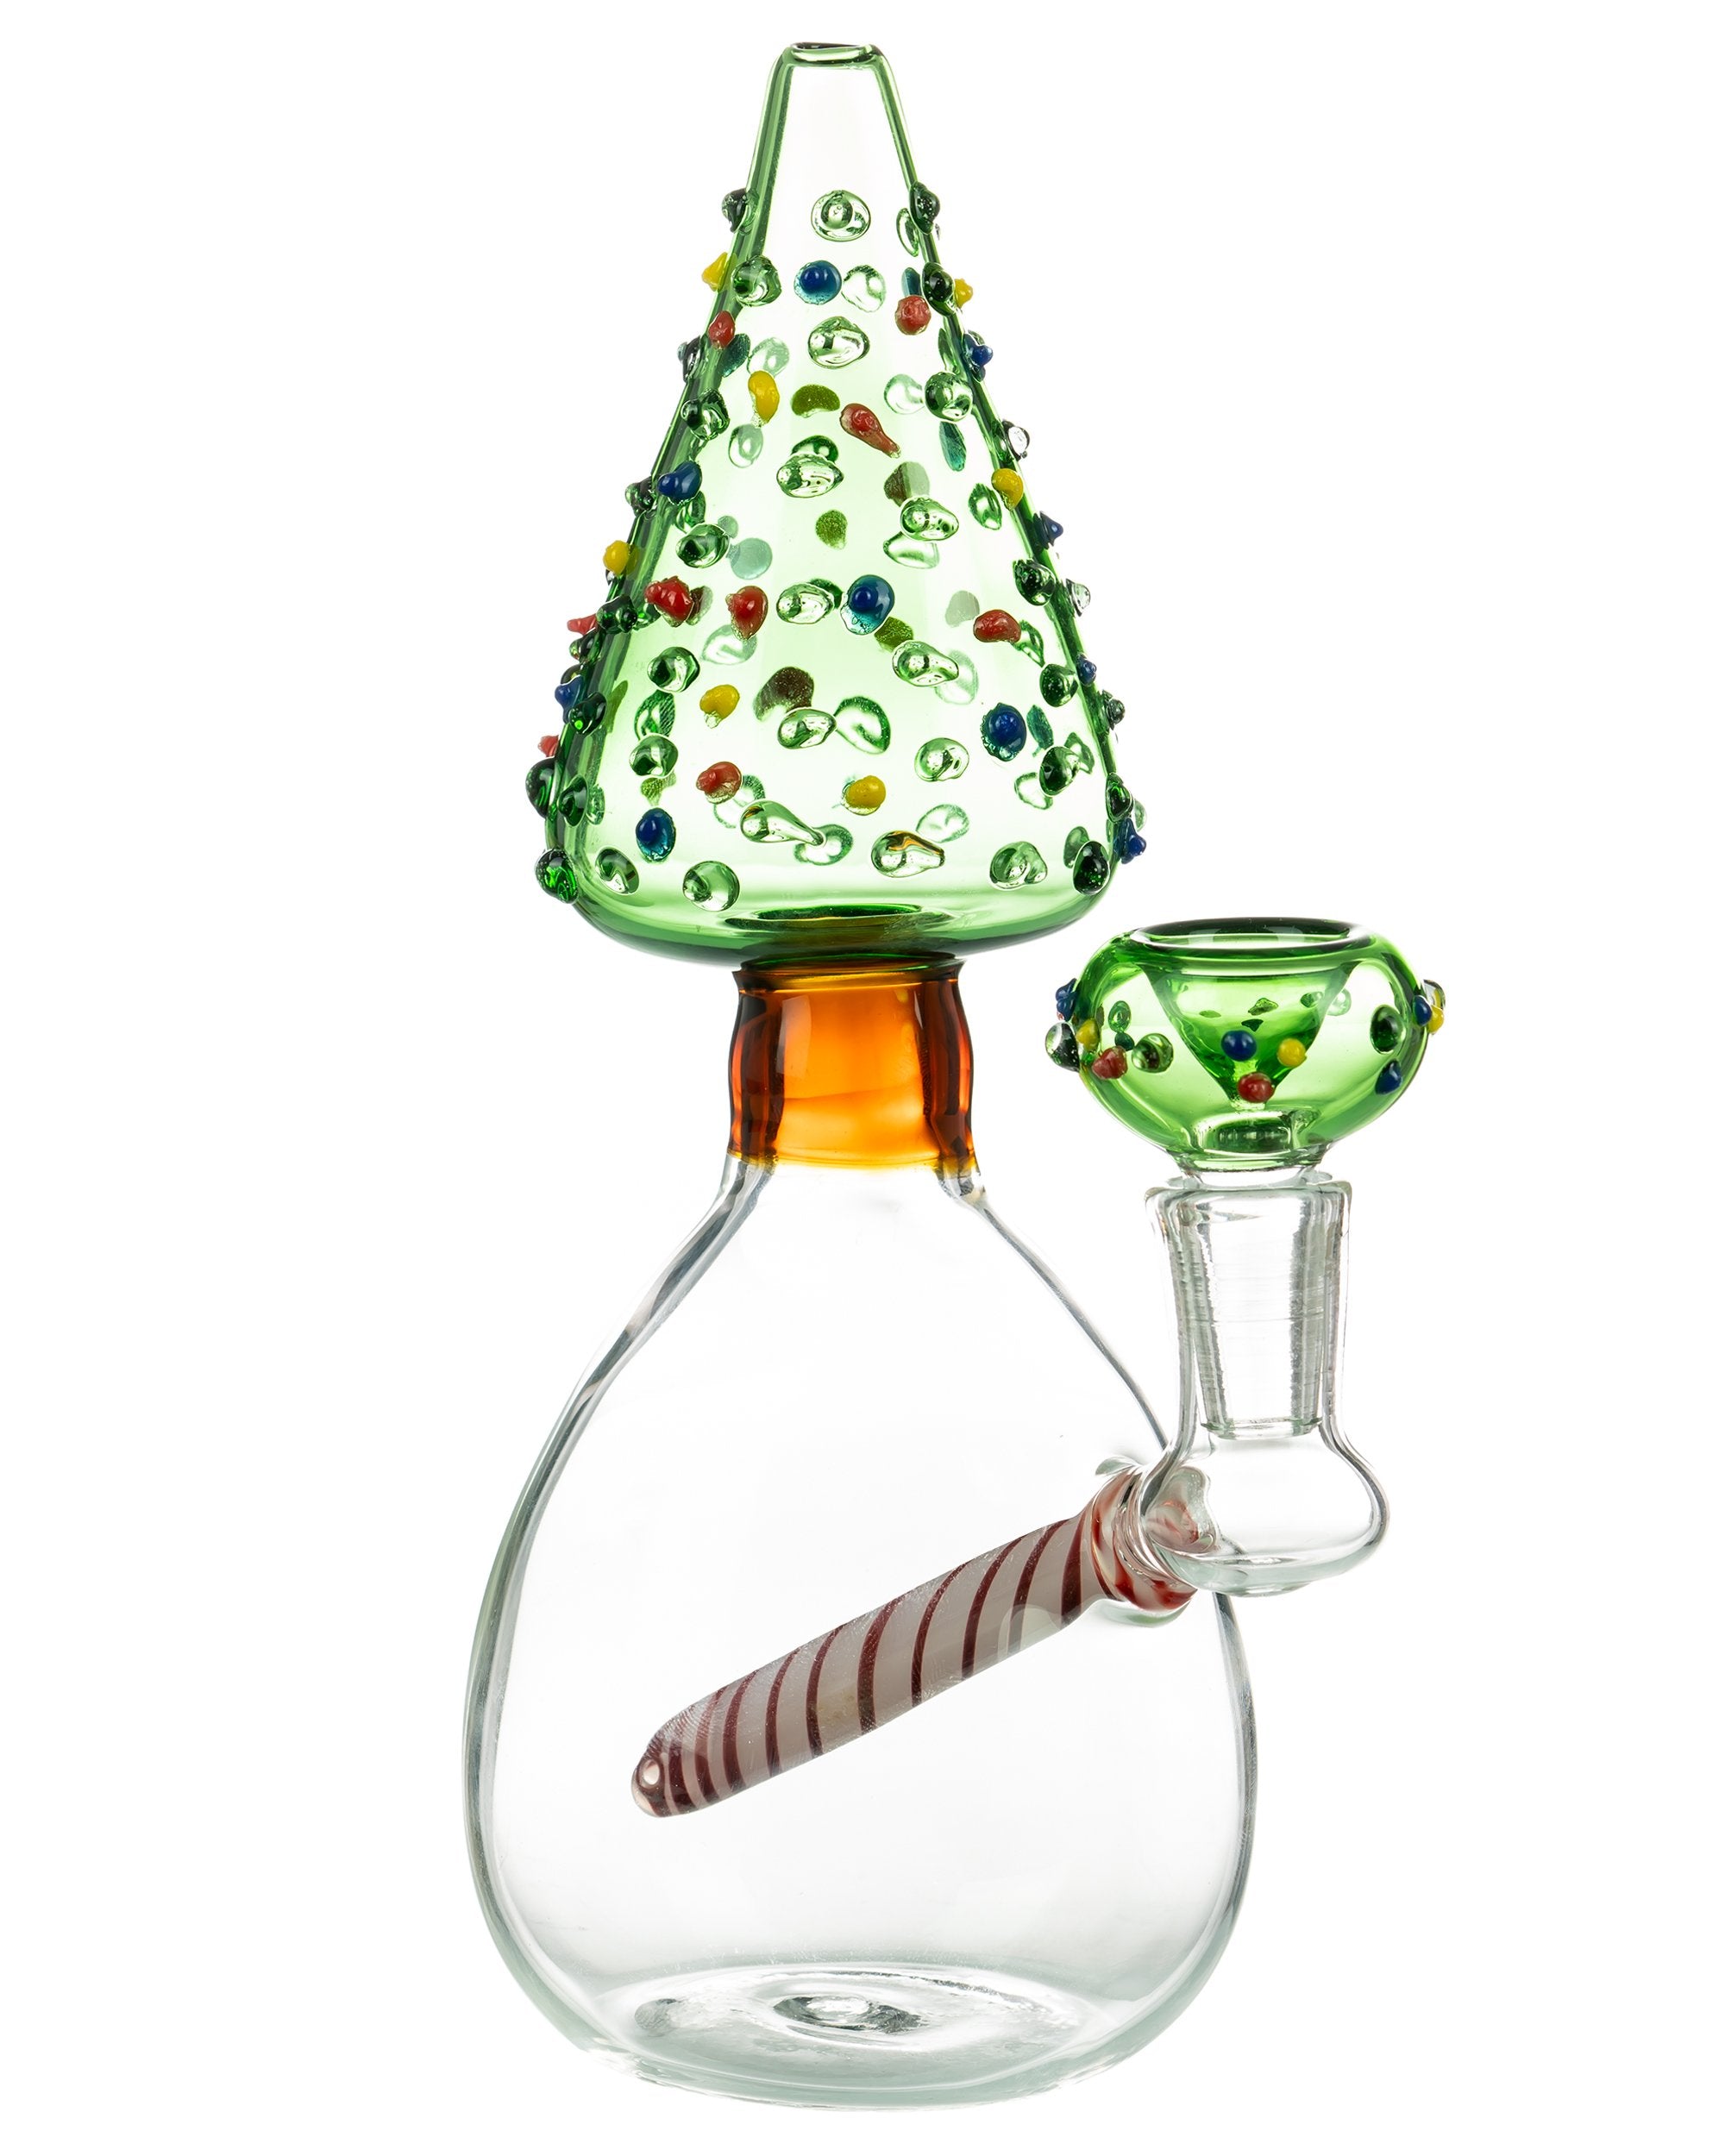 An Introduction To Glass Bubblers (And Why You Need One)